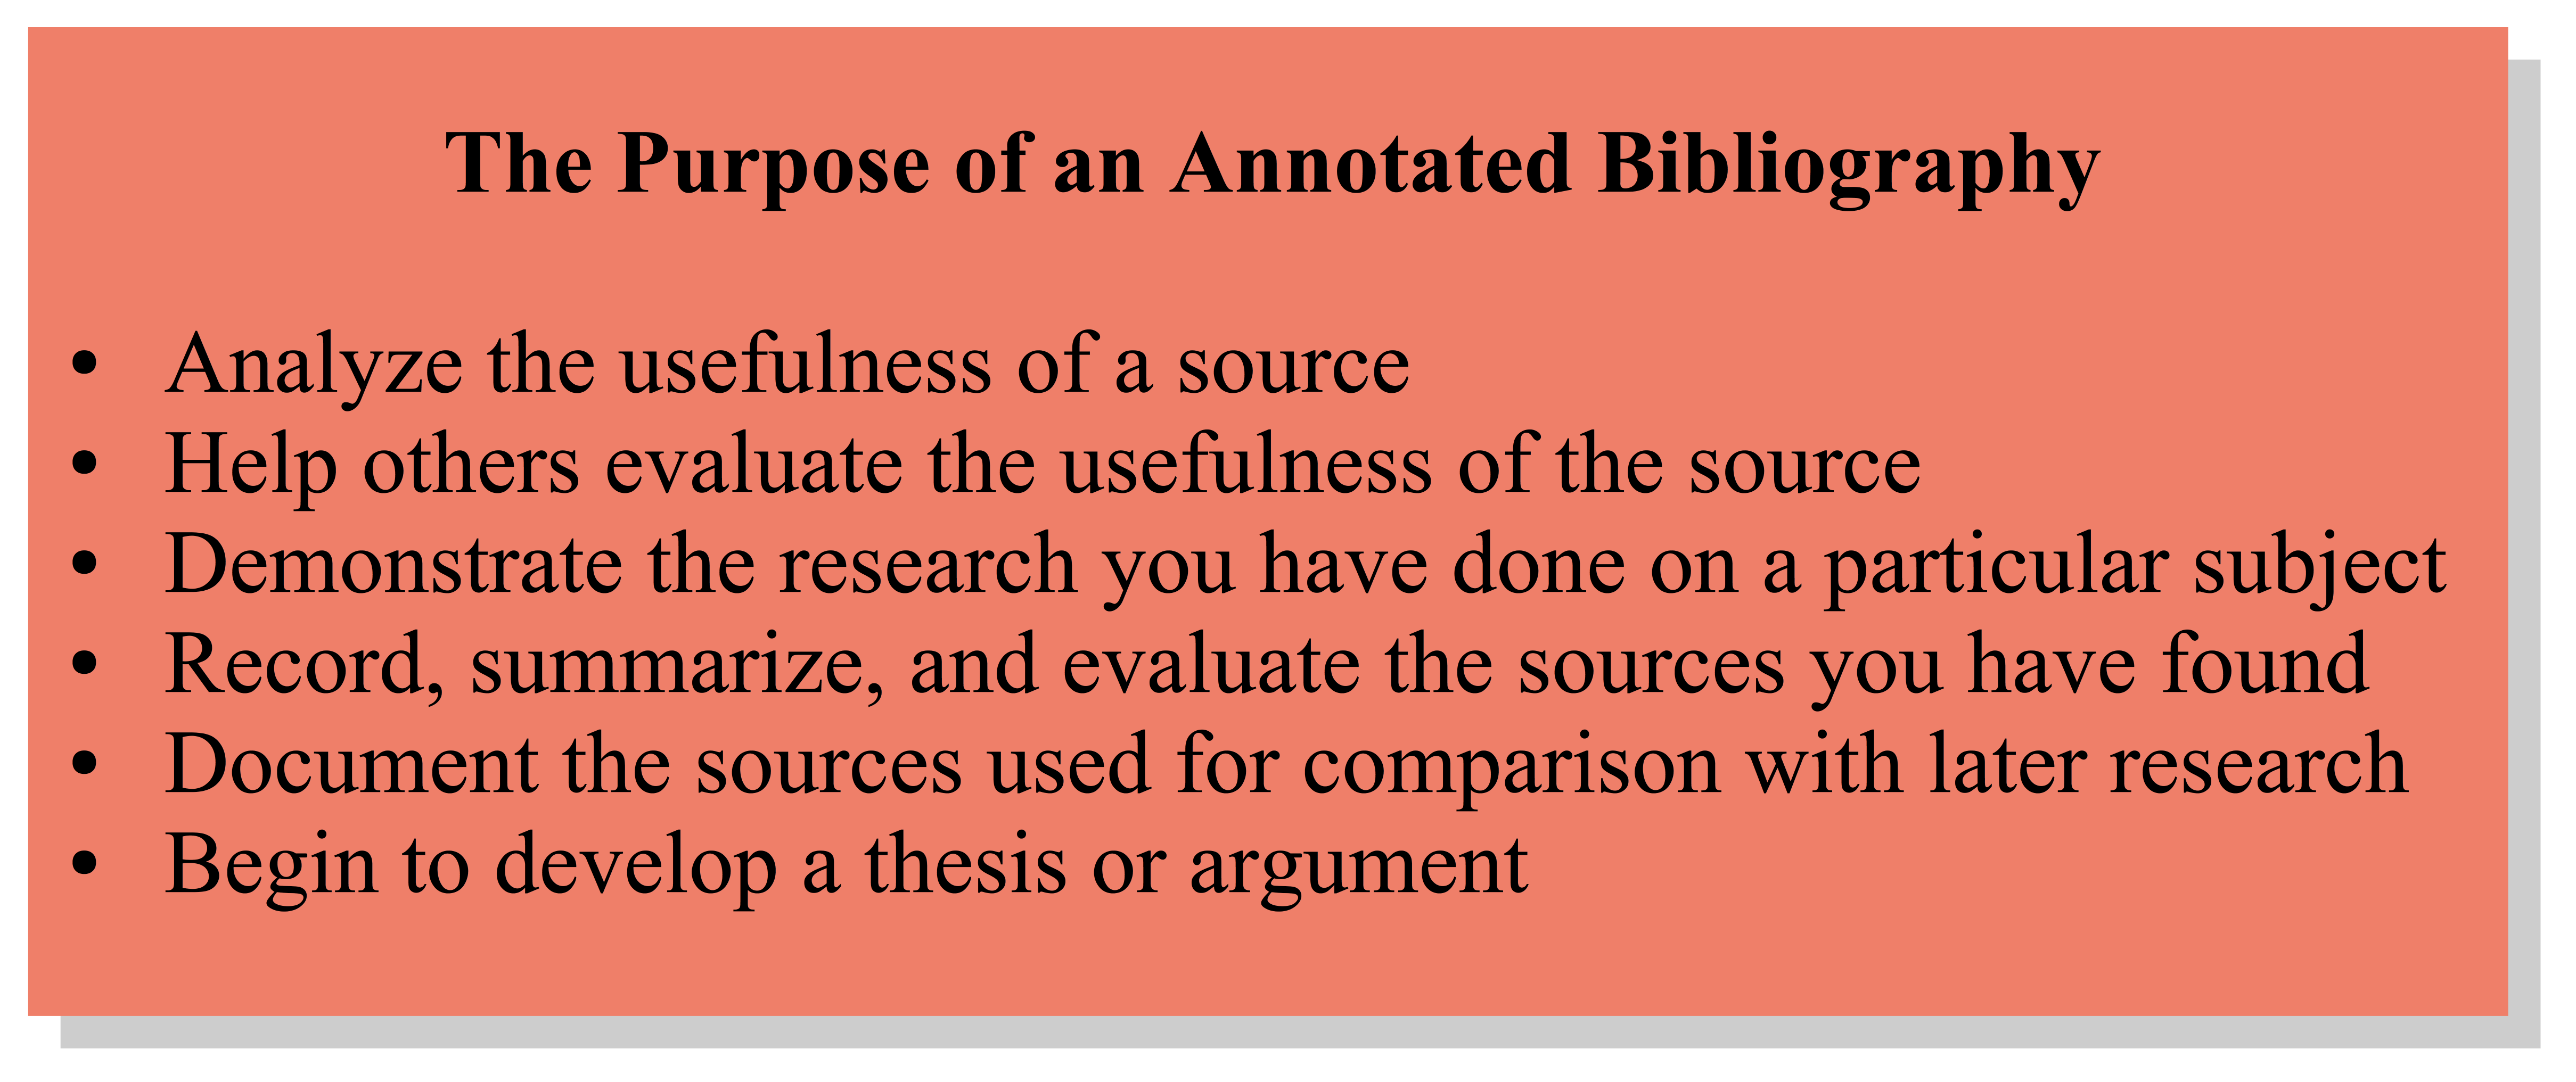 The Purpose of an Annotated Bibliography: Analyze the usefulness of a source, Help others evaluate the usefulness of the source, Demonstrate the research you have done on a particular subject, Record, summarize, and evaluate the sources you have found, Document the sources used for comparison with later research, Begin to develop a thesis or argument.